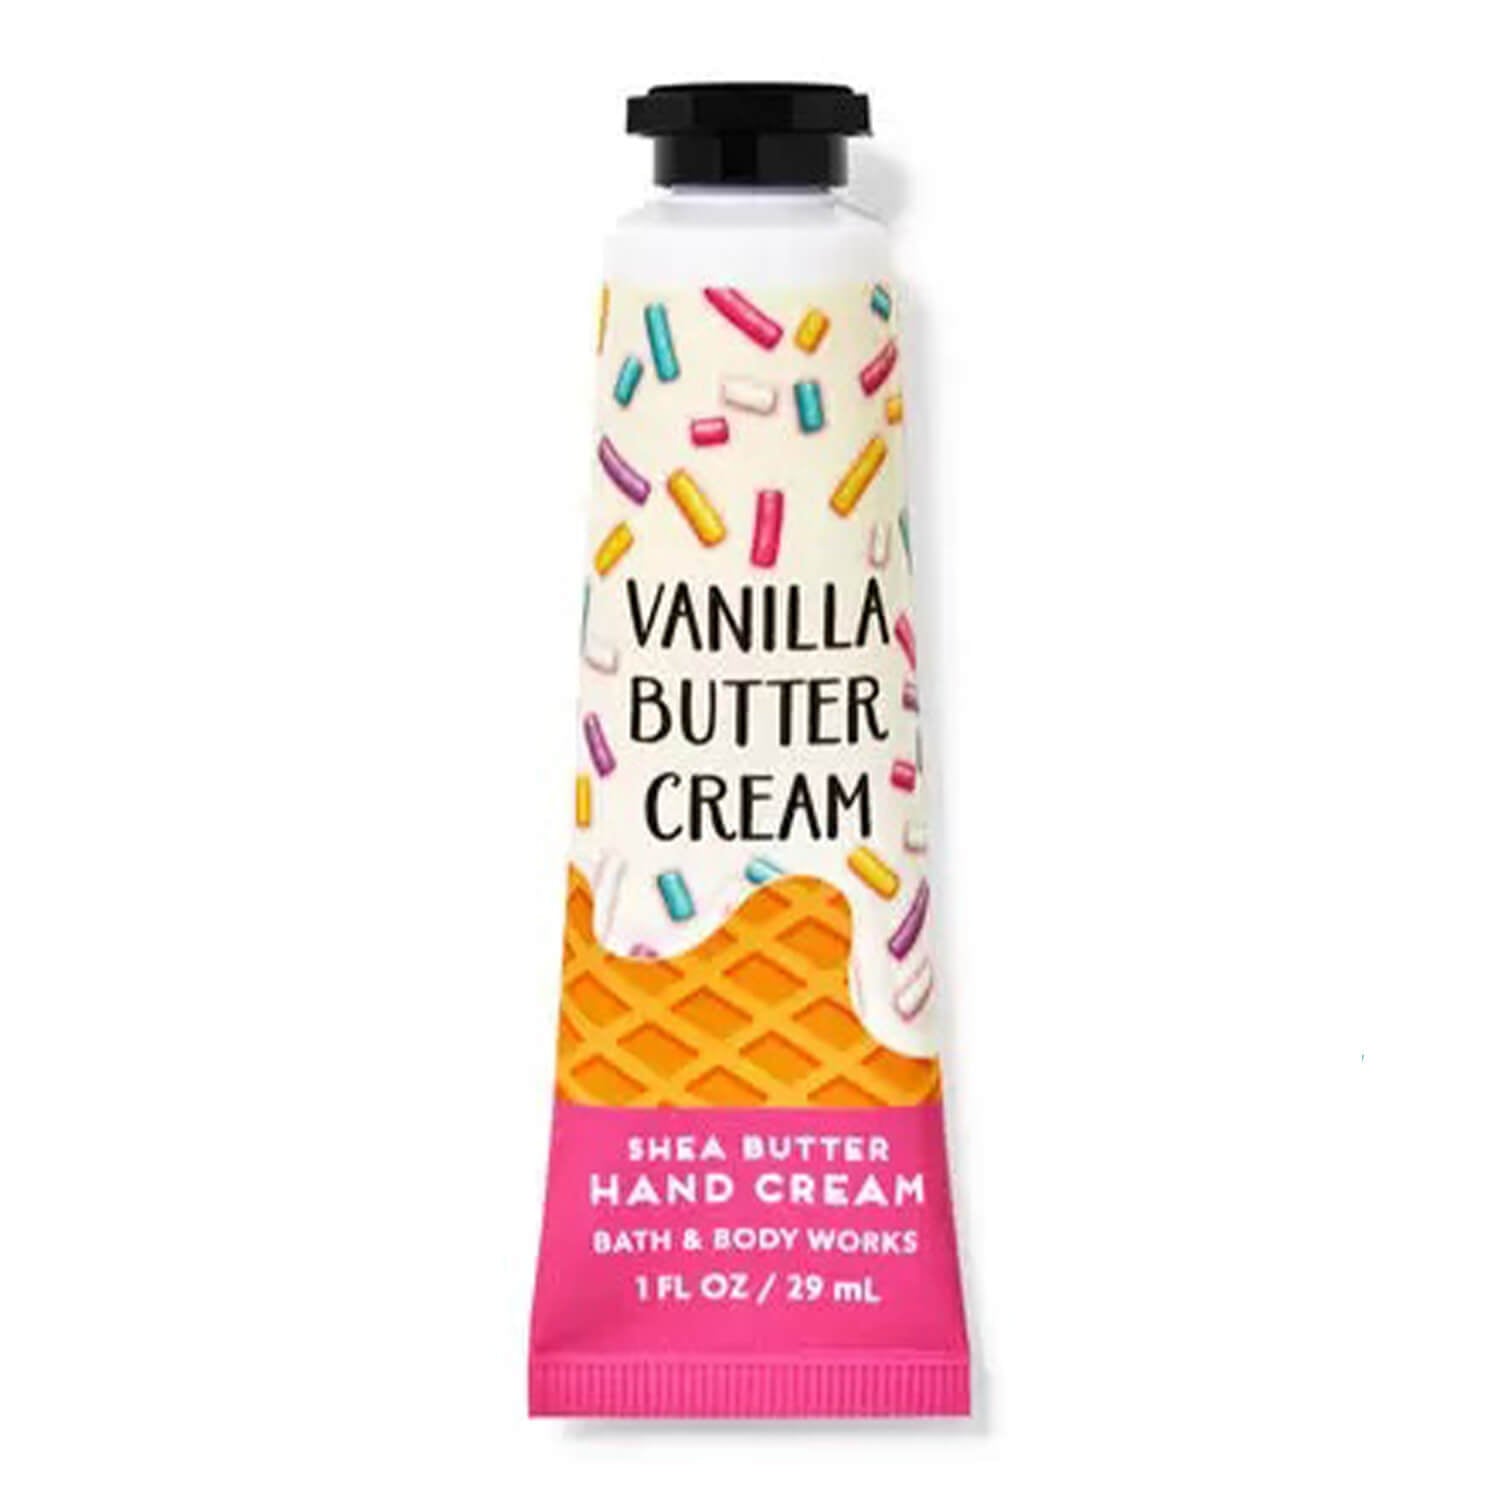 Shop bath and body works hand cream in vanilla buttercream available at Heygirl.pk for delivery in Pakistan